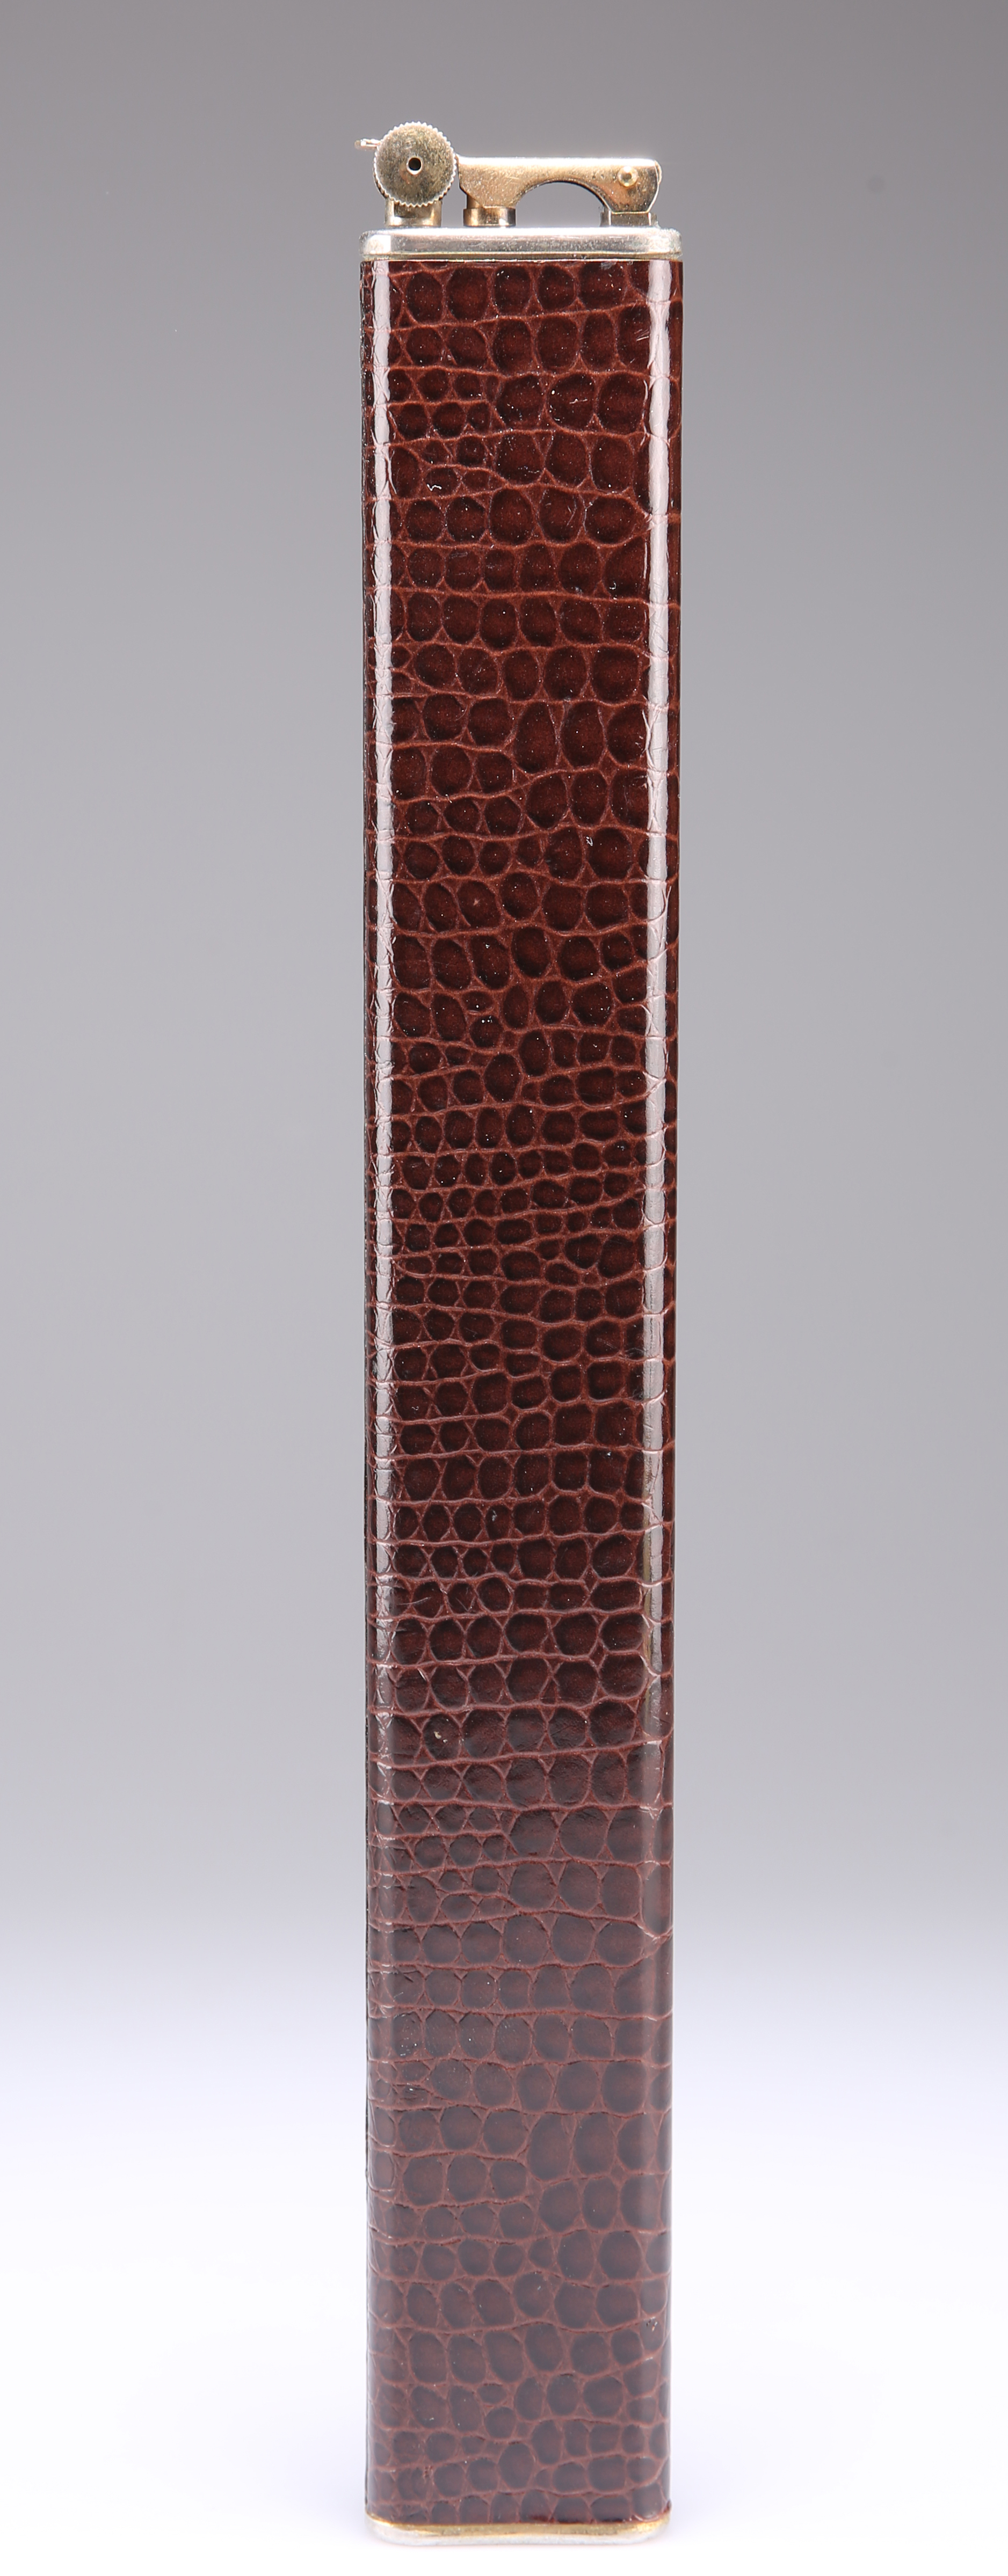 A VINTAGE FRENCH LEATHER COVERED TALL LIGHTER - Image 2 of 2